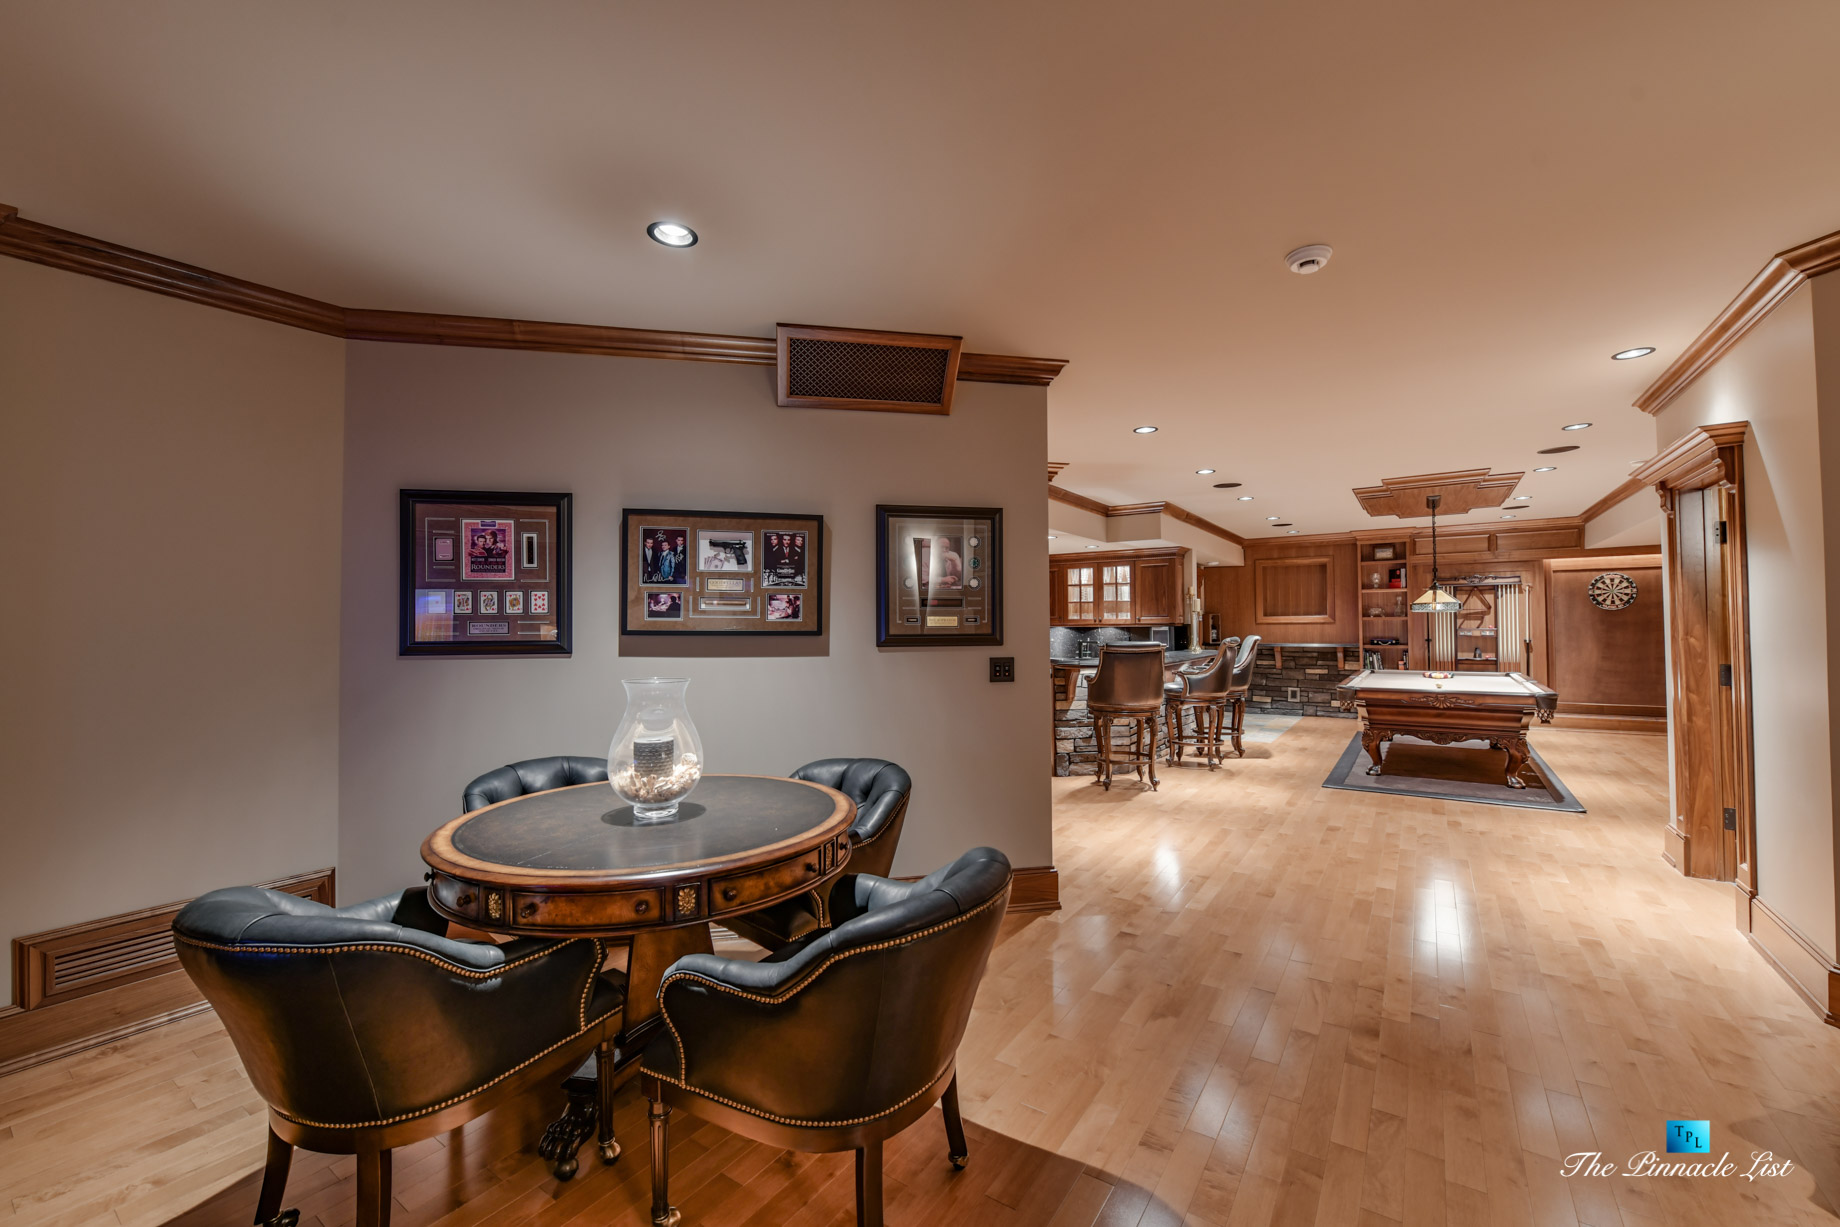 3053 Anmore Creek Way, Anmore, BC, Canada - Basement Man Cave Poker Table - Luxury Real Estate - Greater Vancouver Home